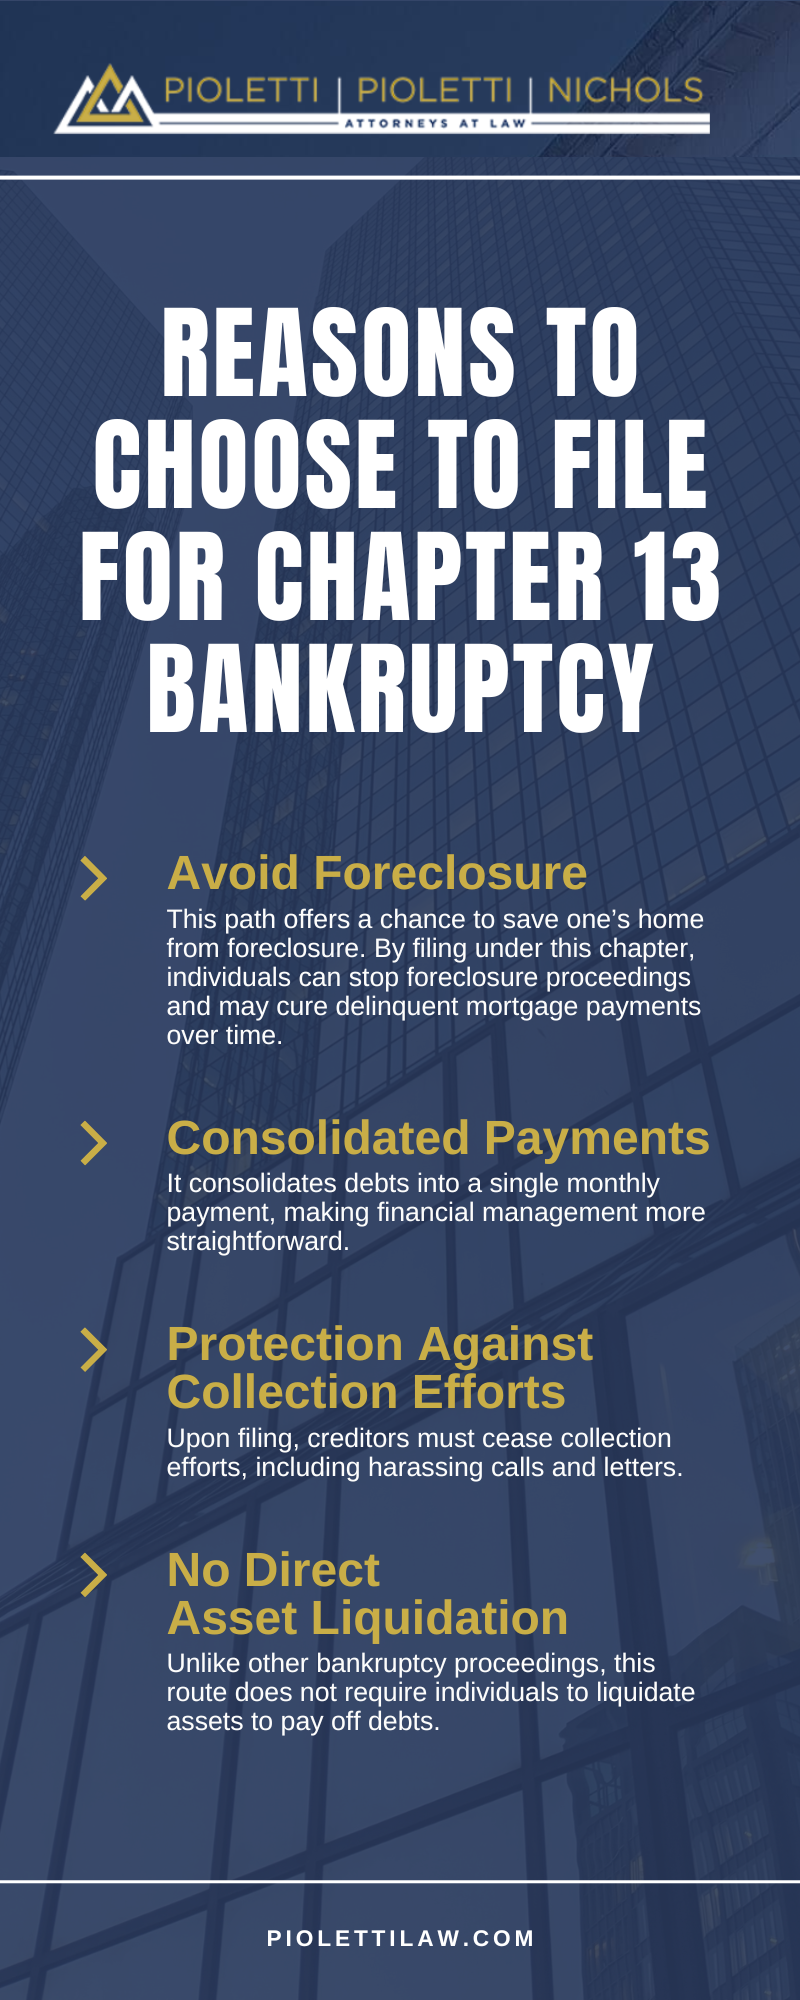 Reasons To Choose To File For Chapter 13 Bankruptcy Infographic